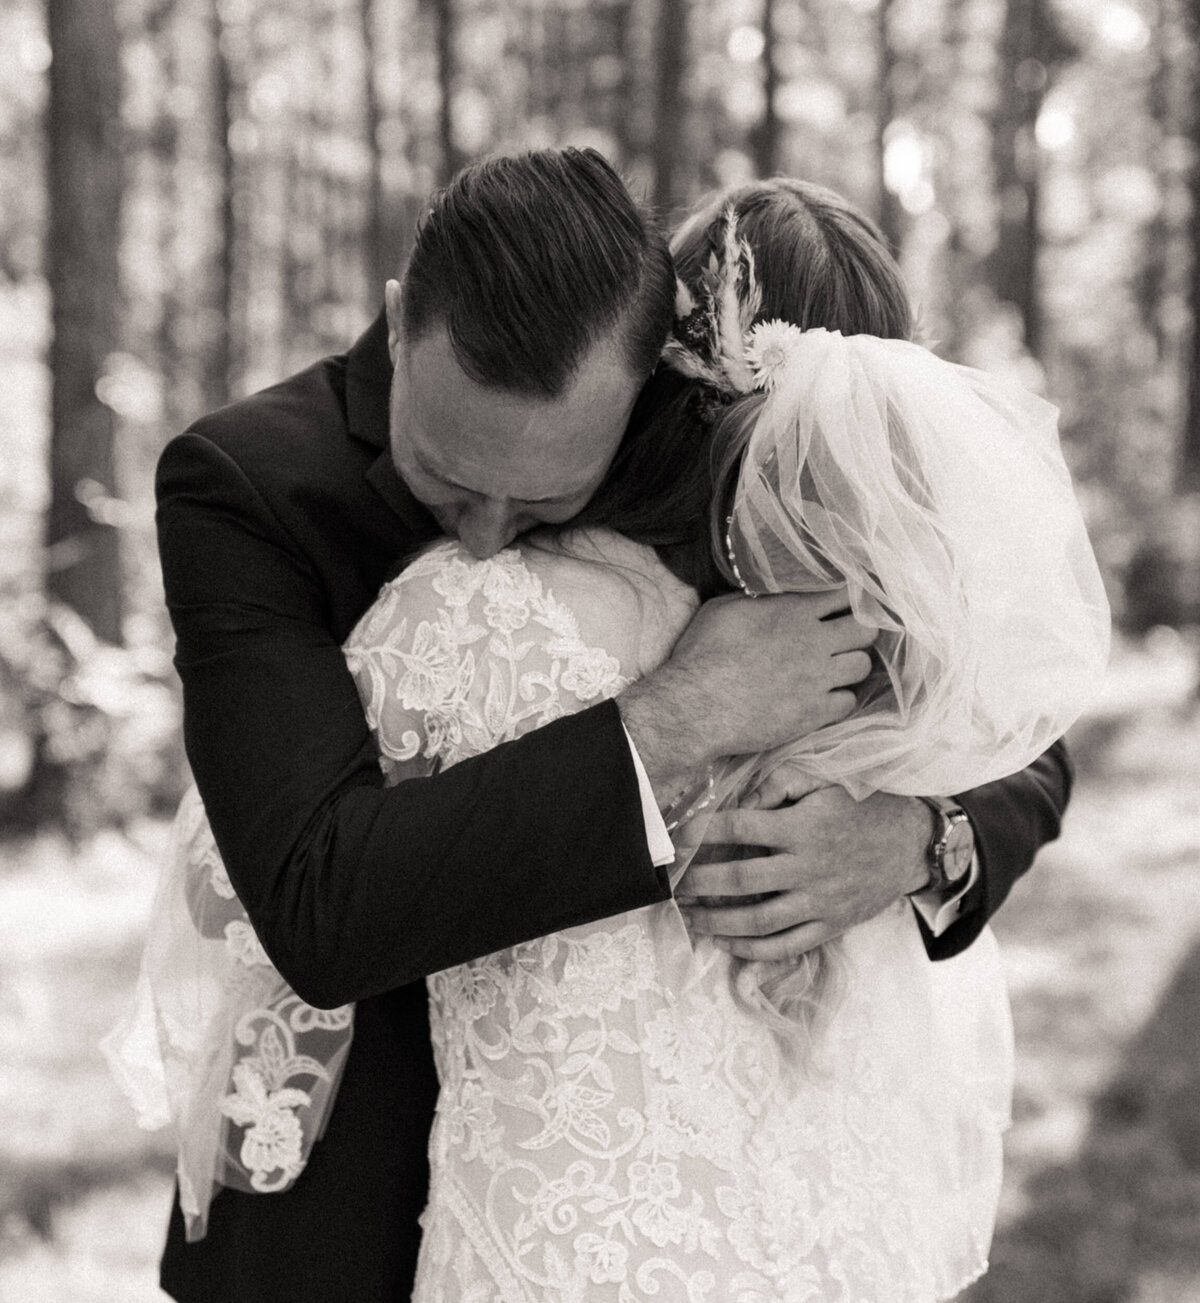 Special moment of an emotional groom holding his bride